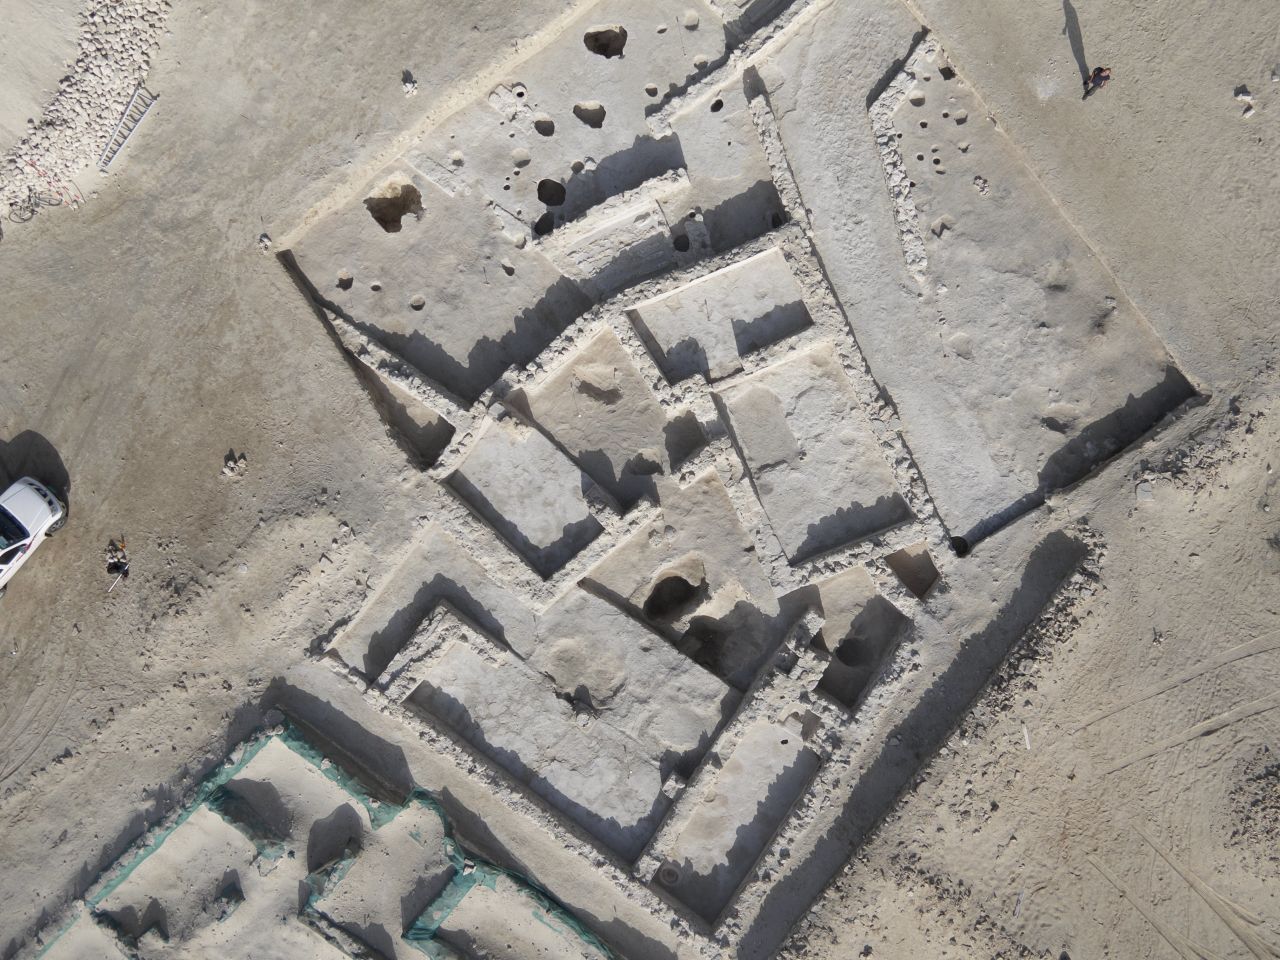 The 18th century town at Al Zubarah is well-planned with many of the streets running at right angles to one another and some neighborhoods built according to a strict grid pattern.